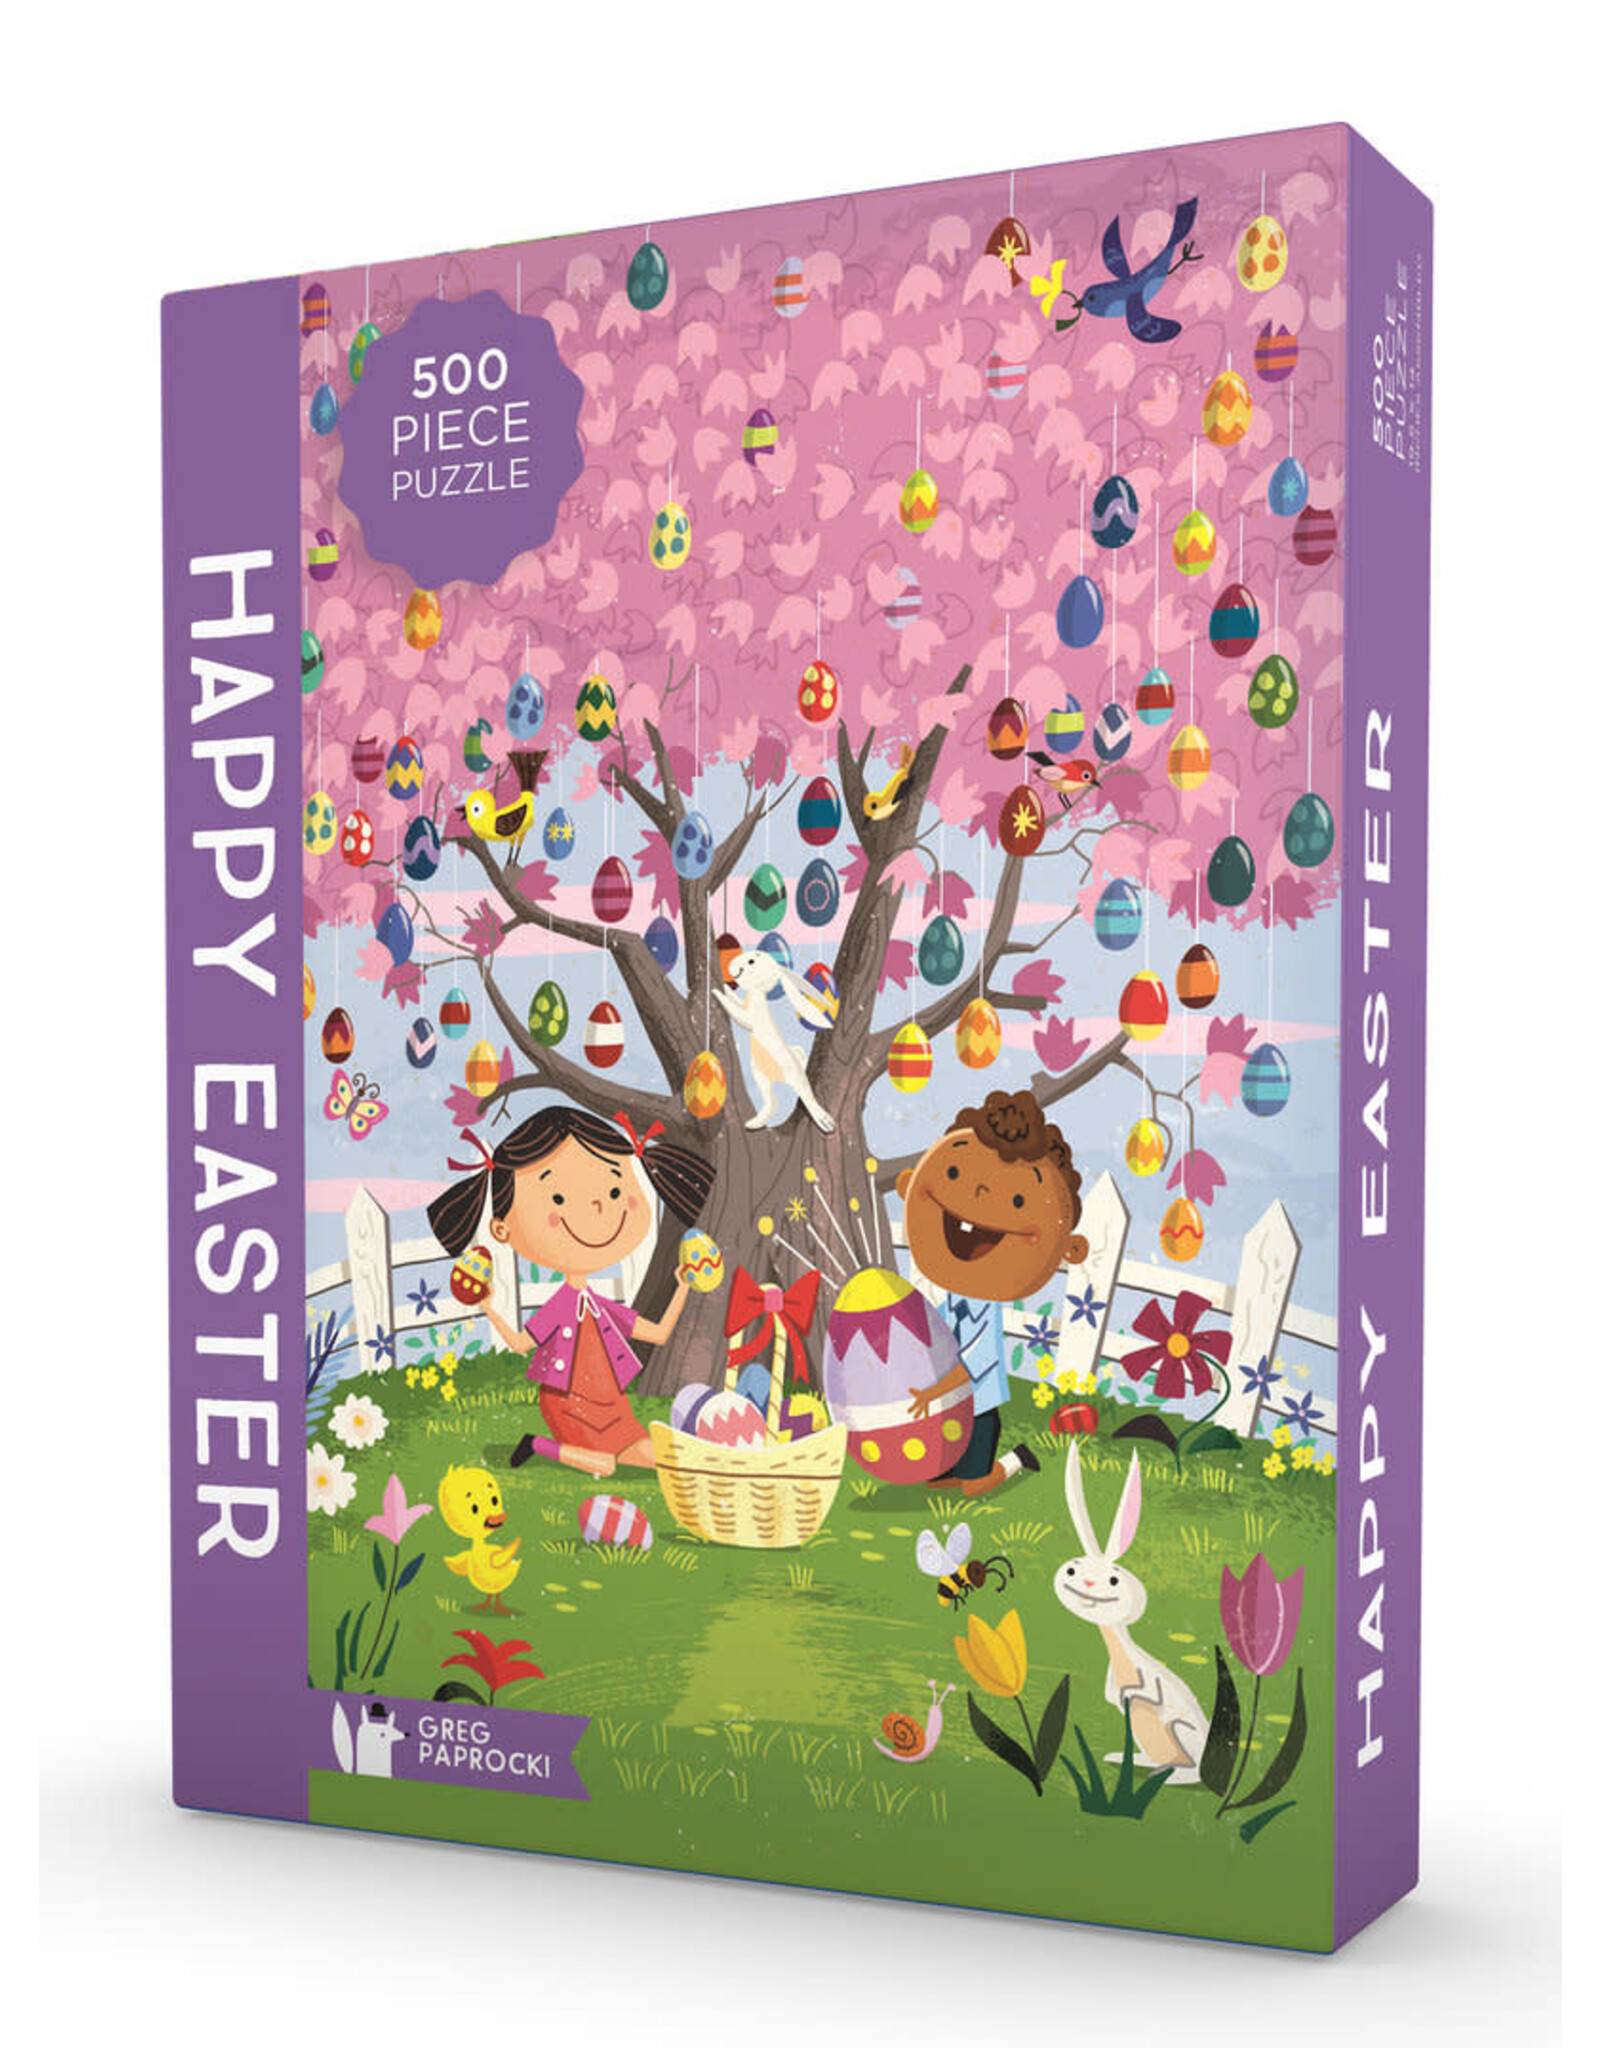 Mudpuppy Happy Easter Puzzle 500pc